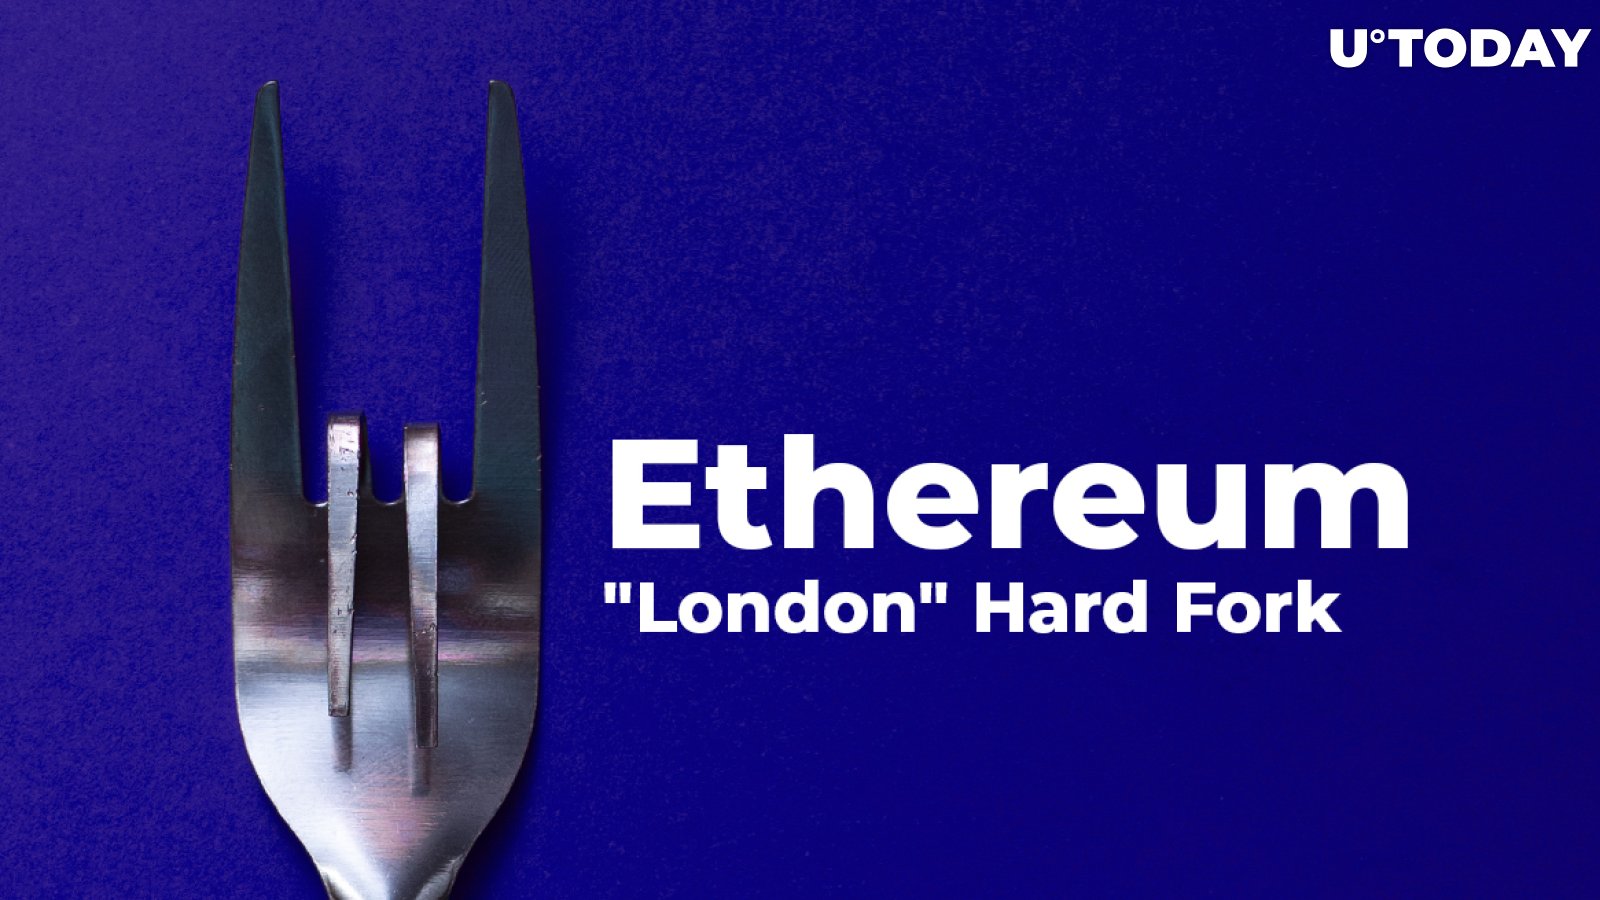 Ethereum Turns 6 Just Days Before Much-Anticipated "London" Hard Fork